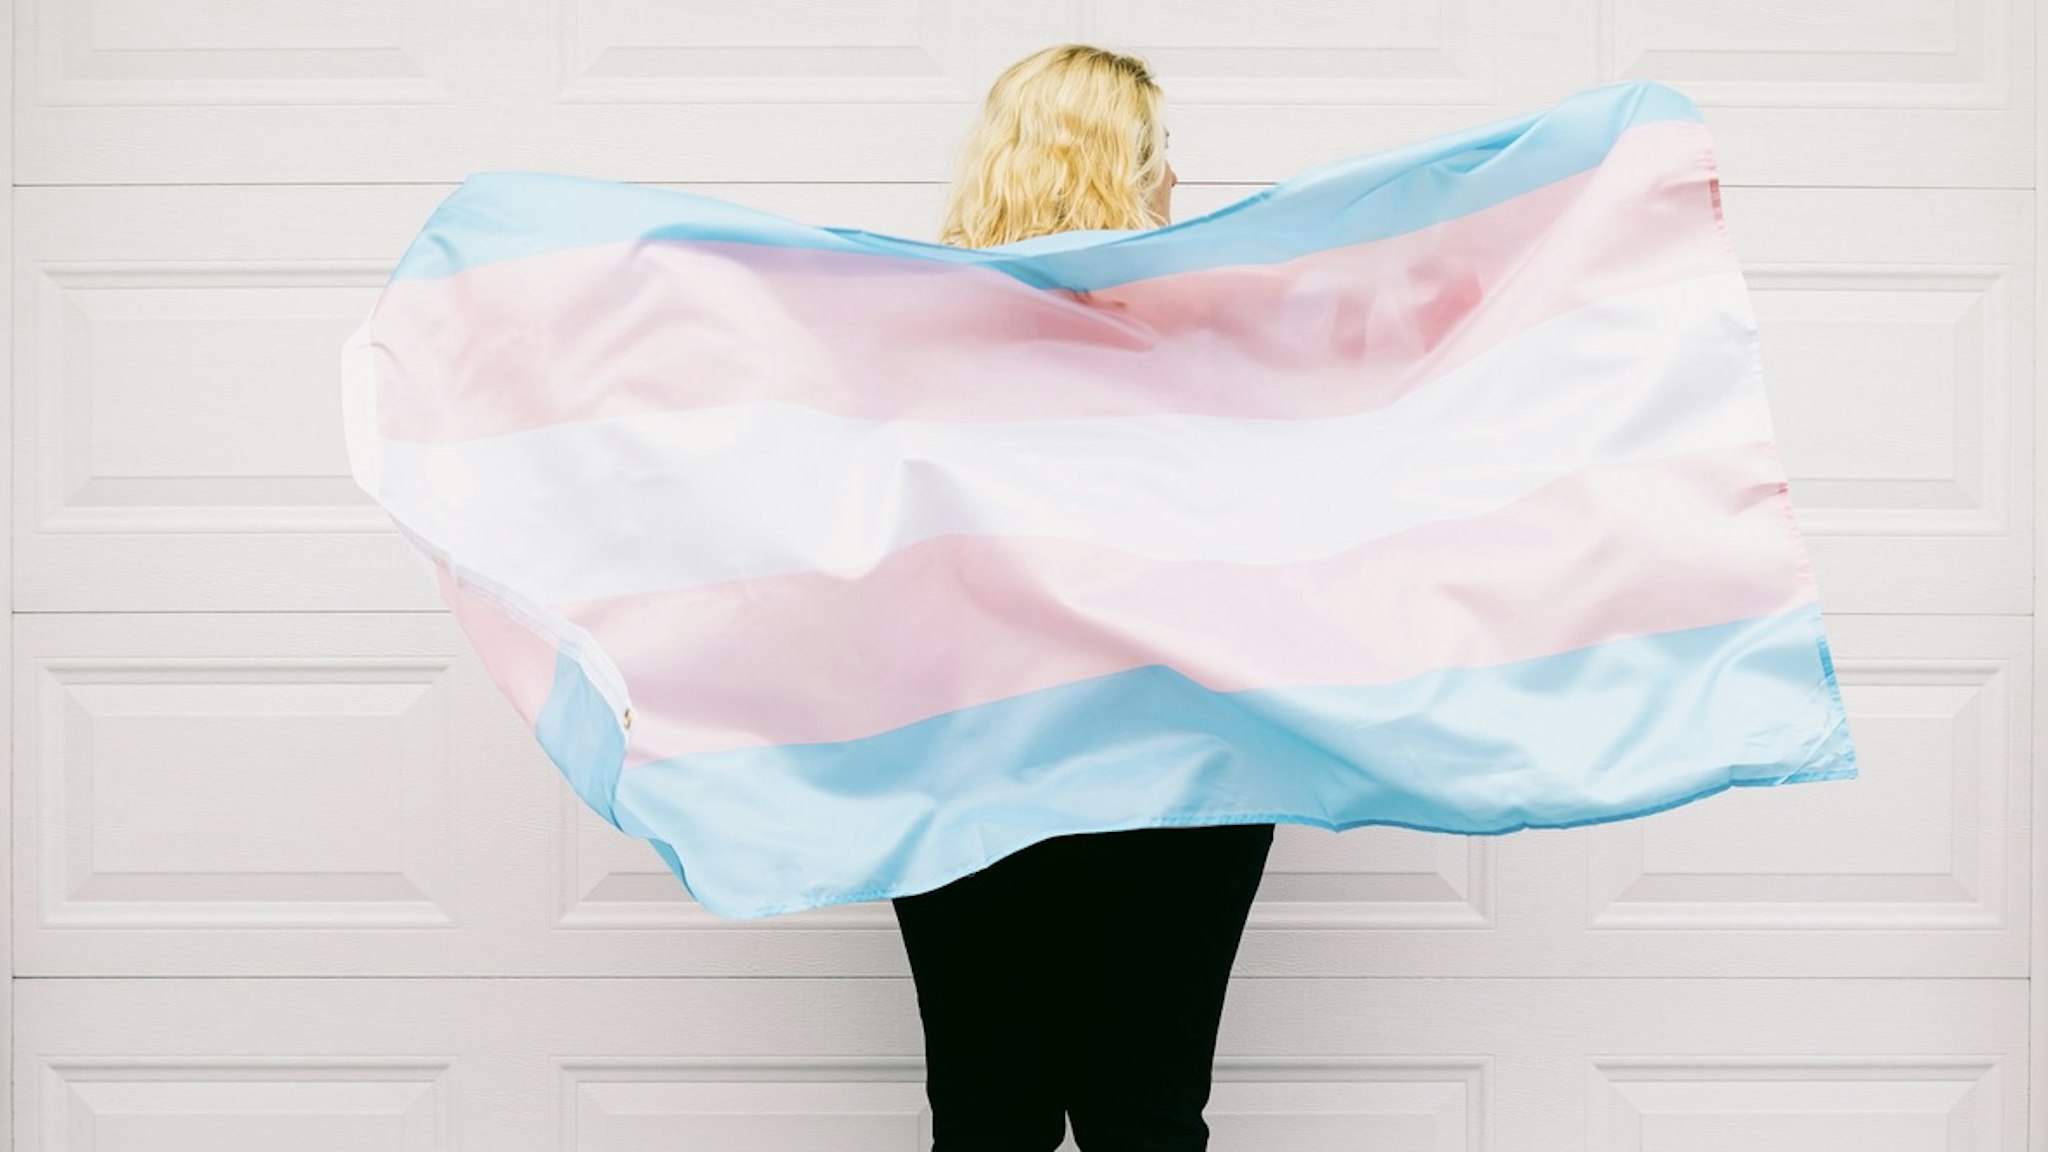 Transgender person from behind, wearing pink and white striped sweatshirt, holds transgender flag - stock photo Transgender person from behind, wearing pink and white striped sweatshirt, holds transgender flag DBenitostock via Getty Images